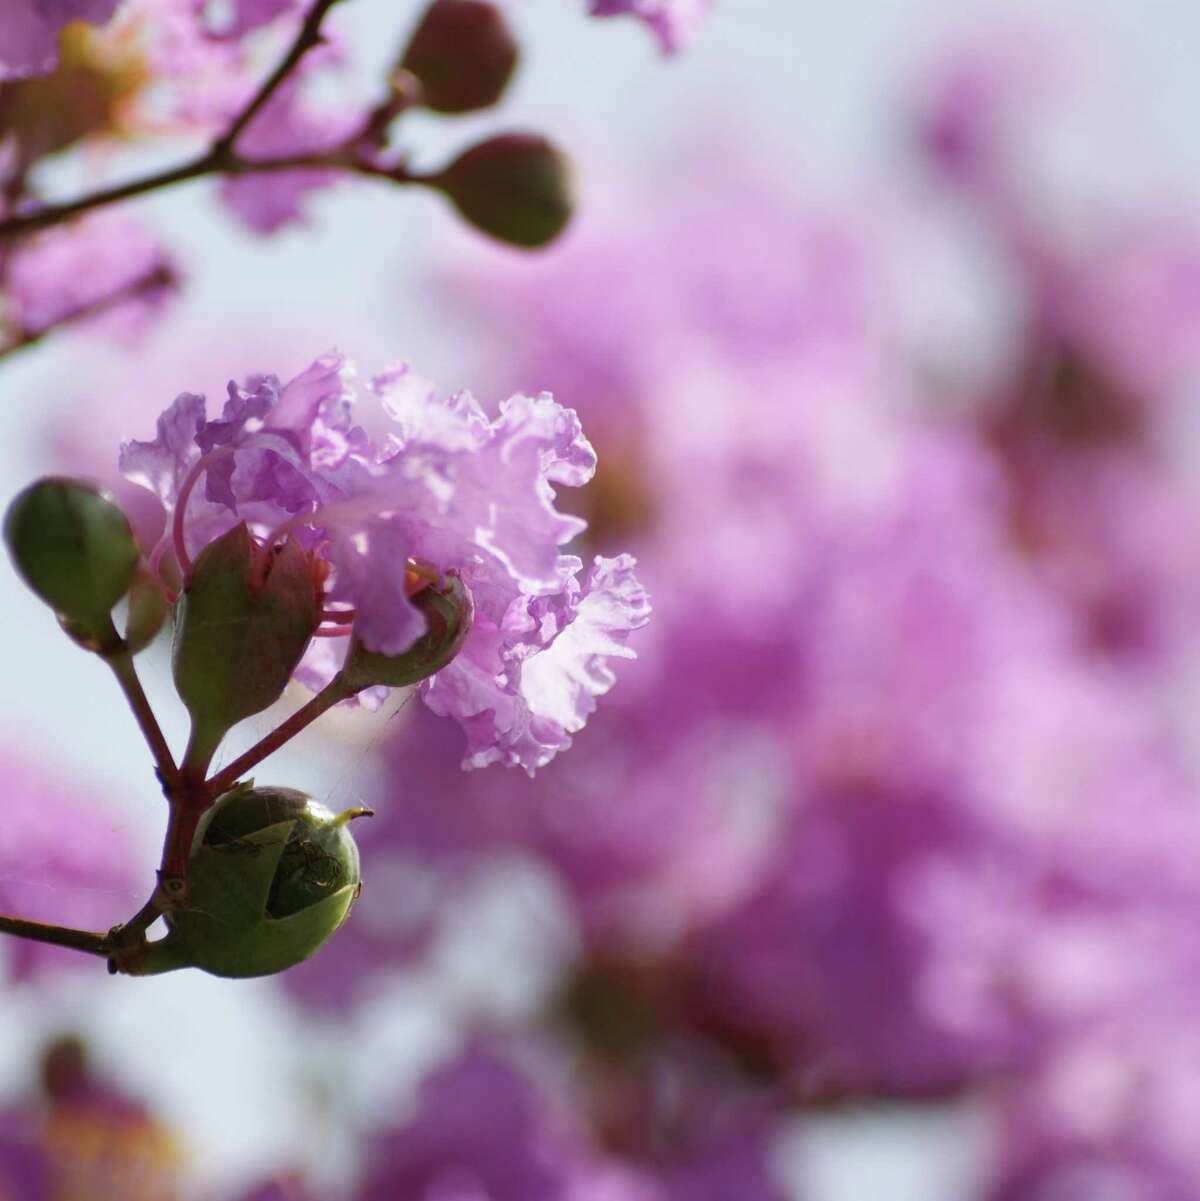 For healthy crape myrtles, don't prune them severely.